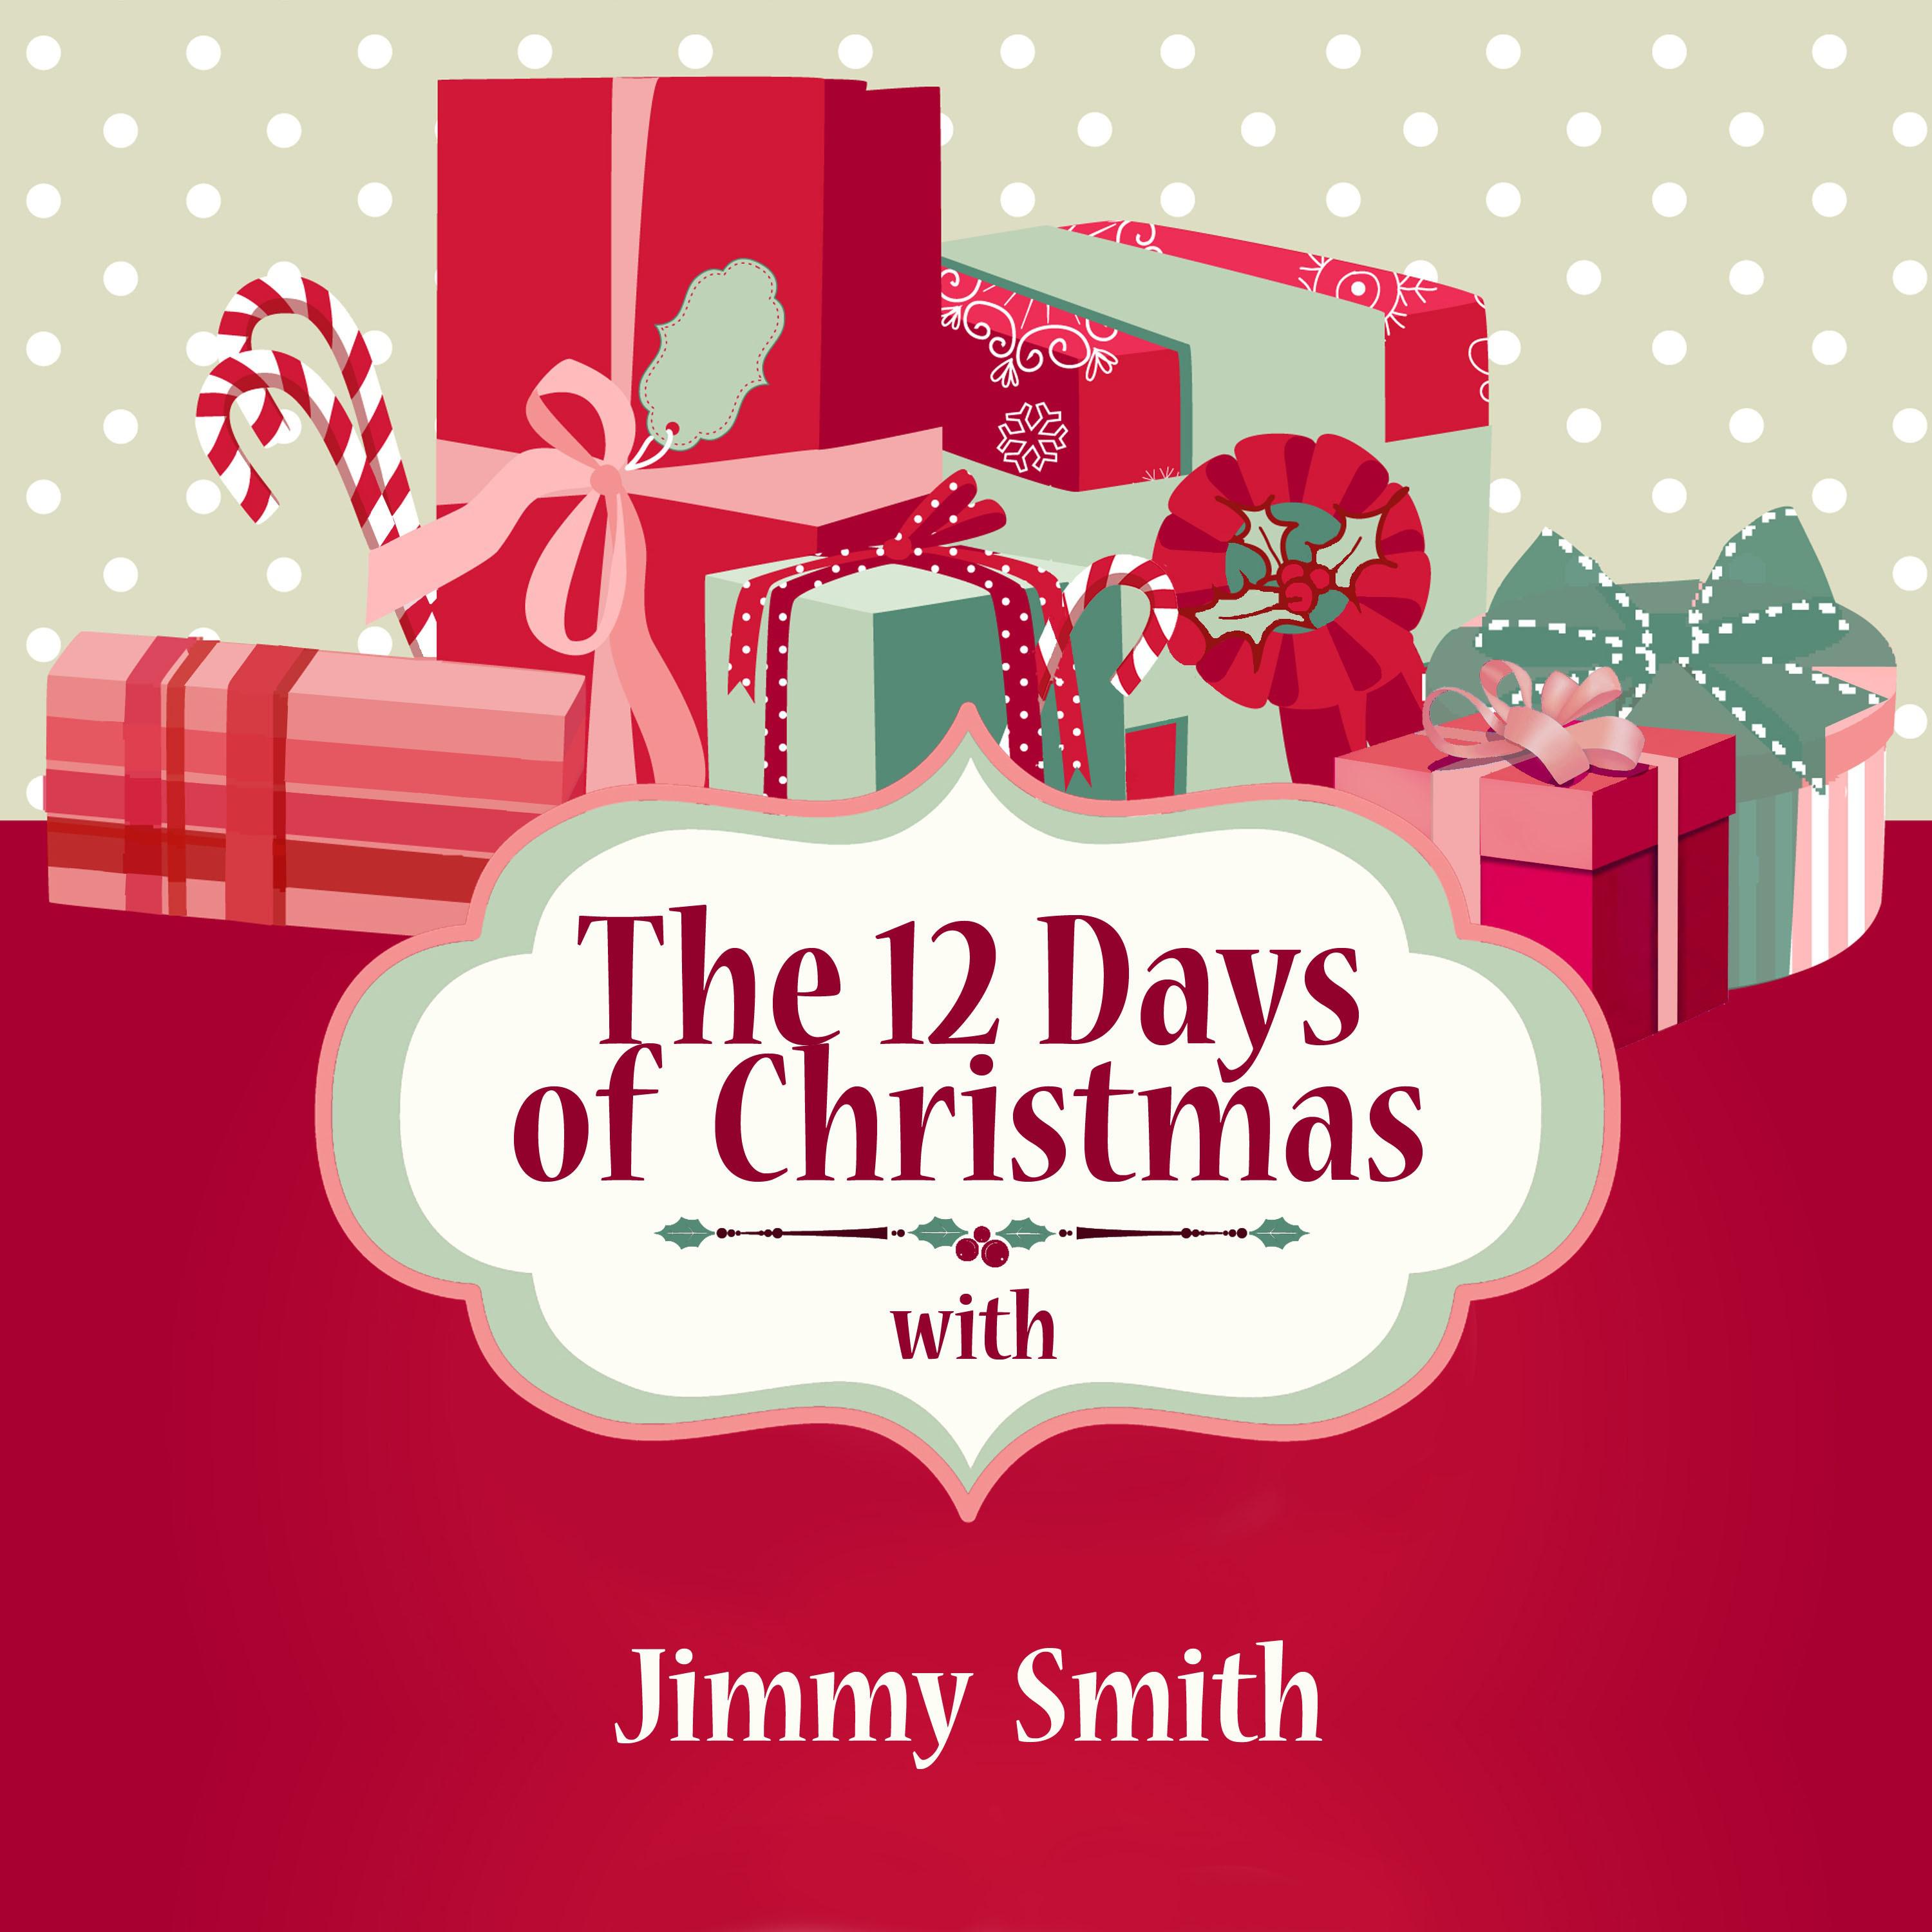 The 12 Days of Christmas with Jimmy Smith